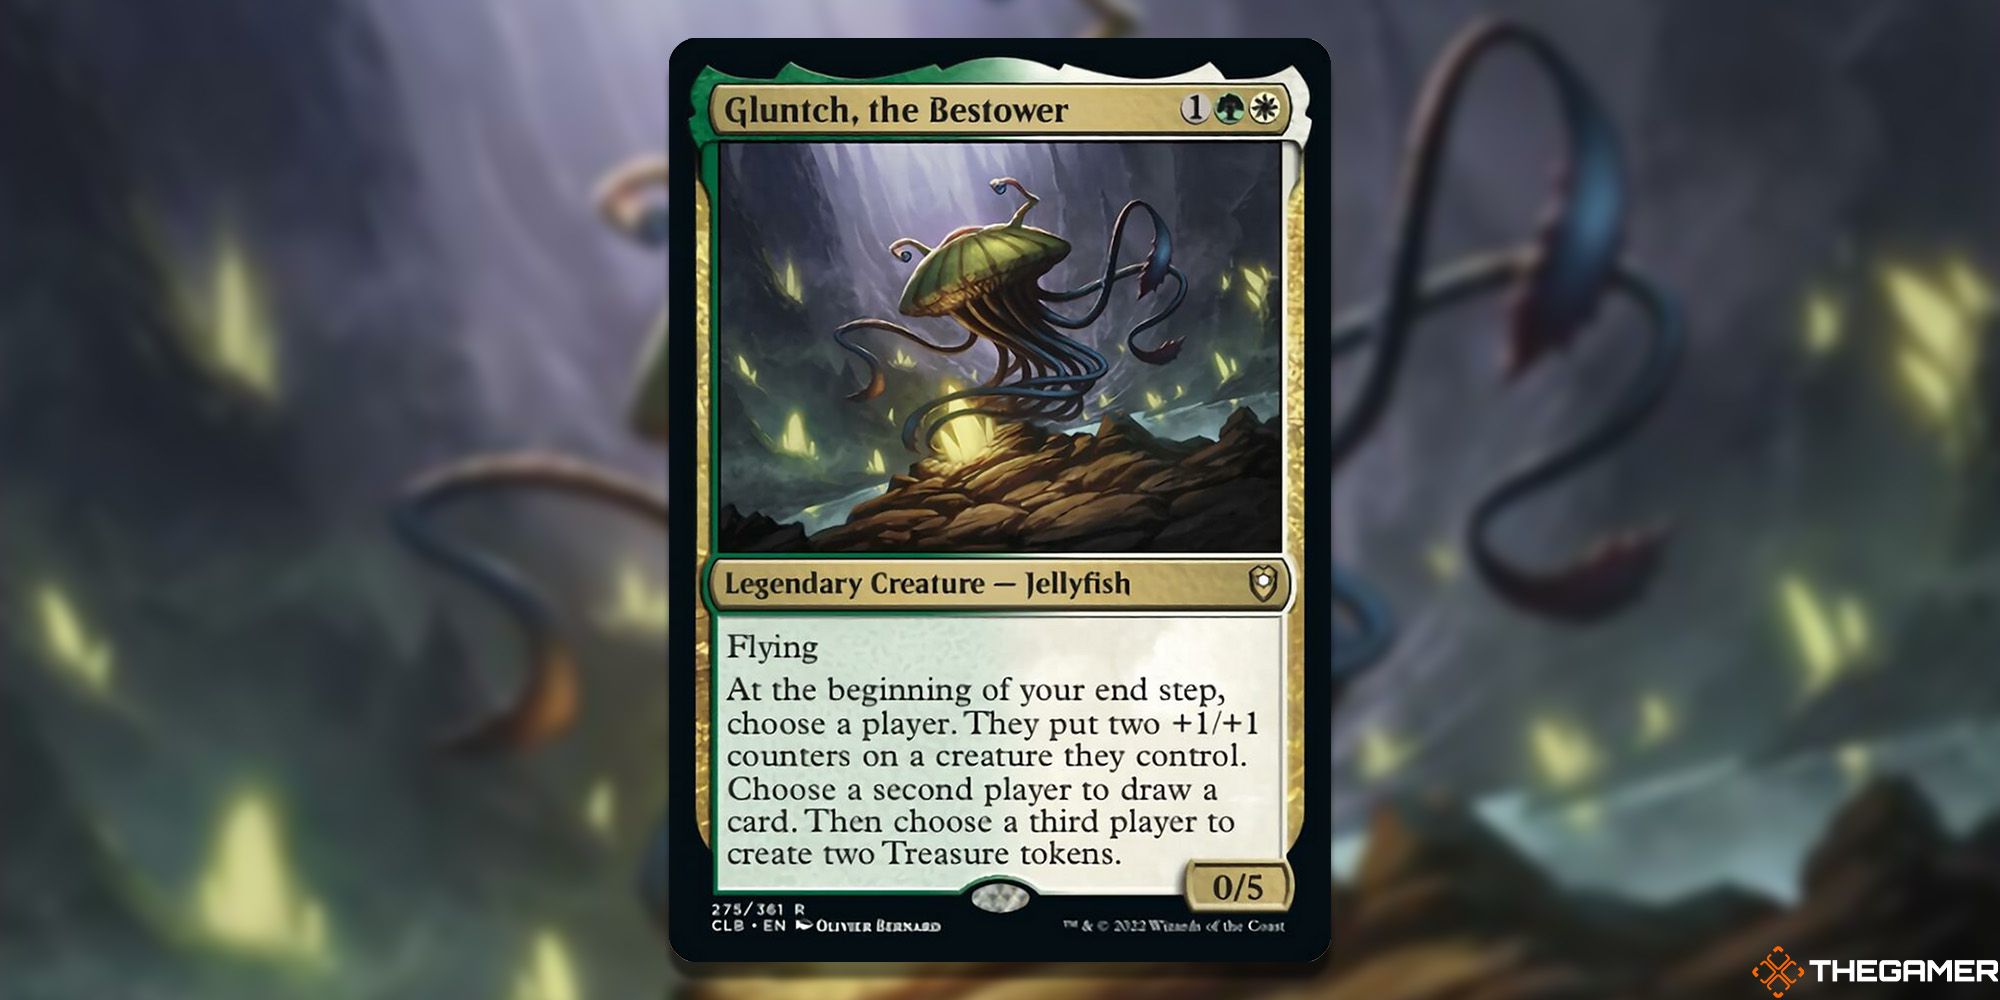 Image of the Gluntch, the Bestower card in Magic: The Gathering, with art by Olivier Bernard